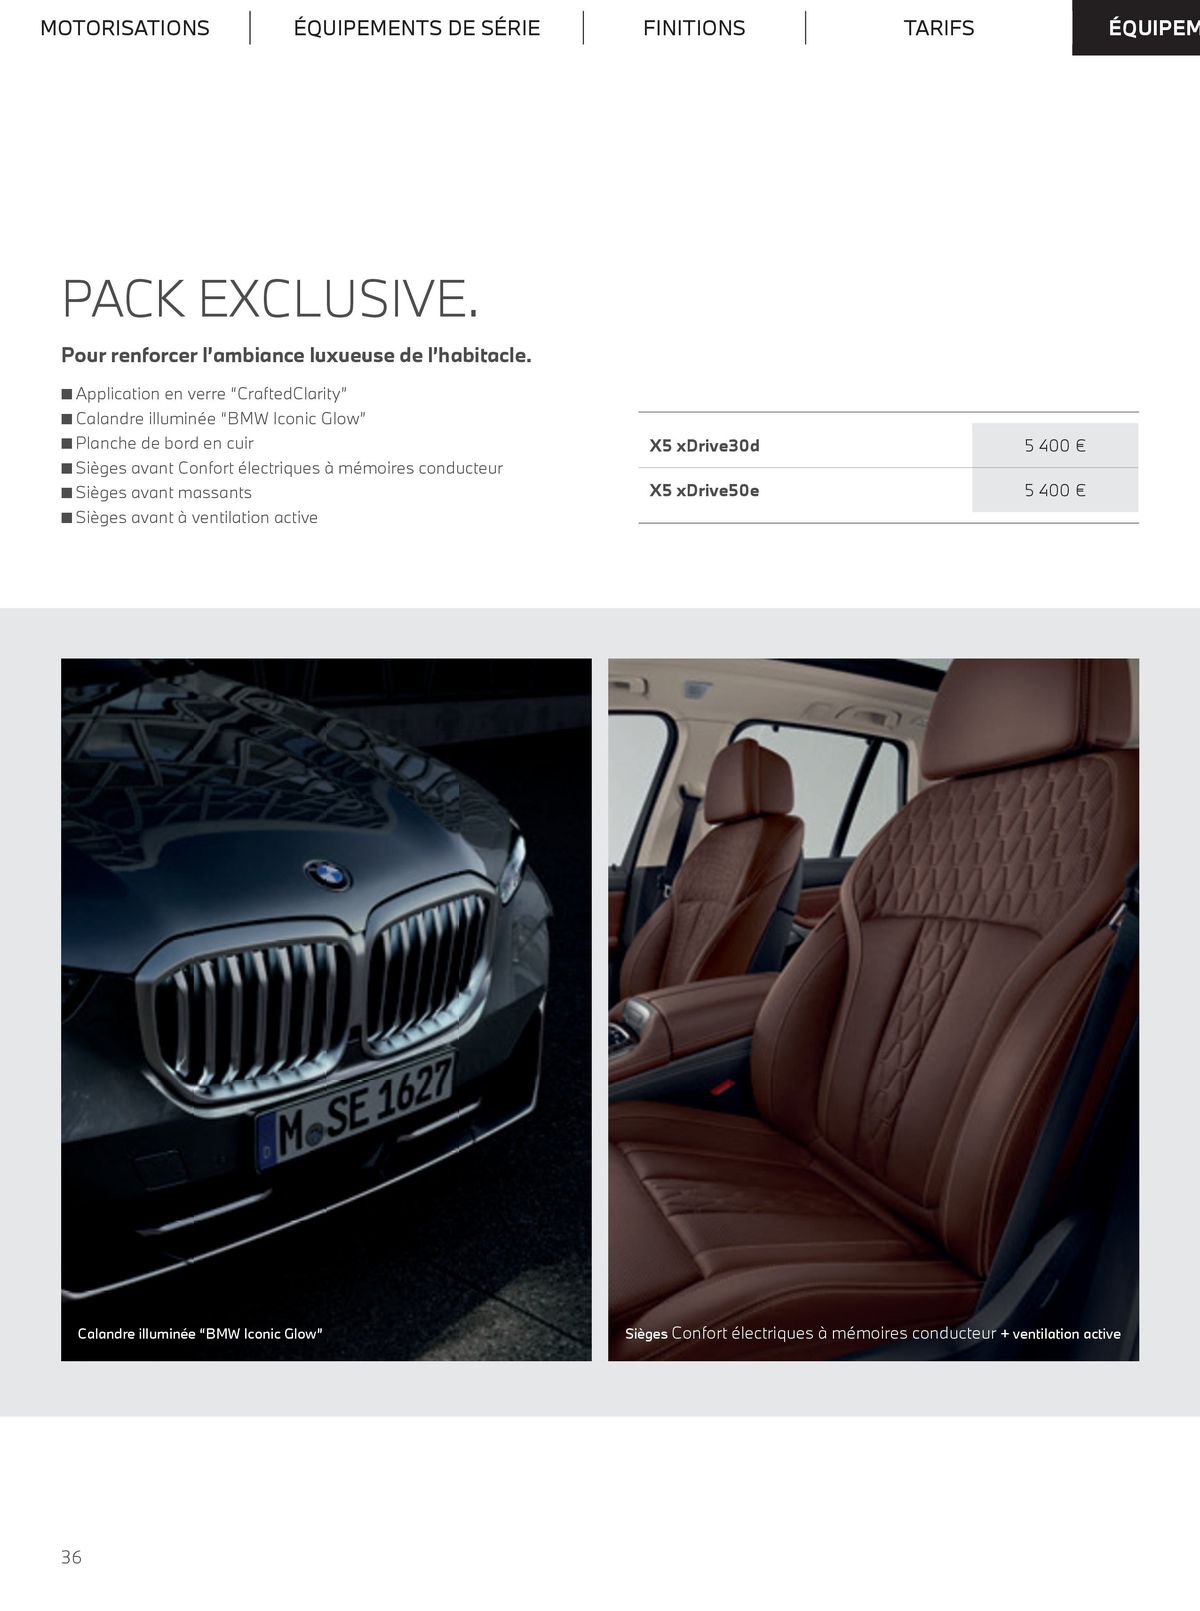 Catalogue The new X5, page 00036